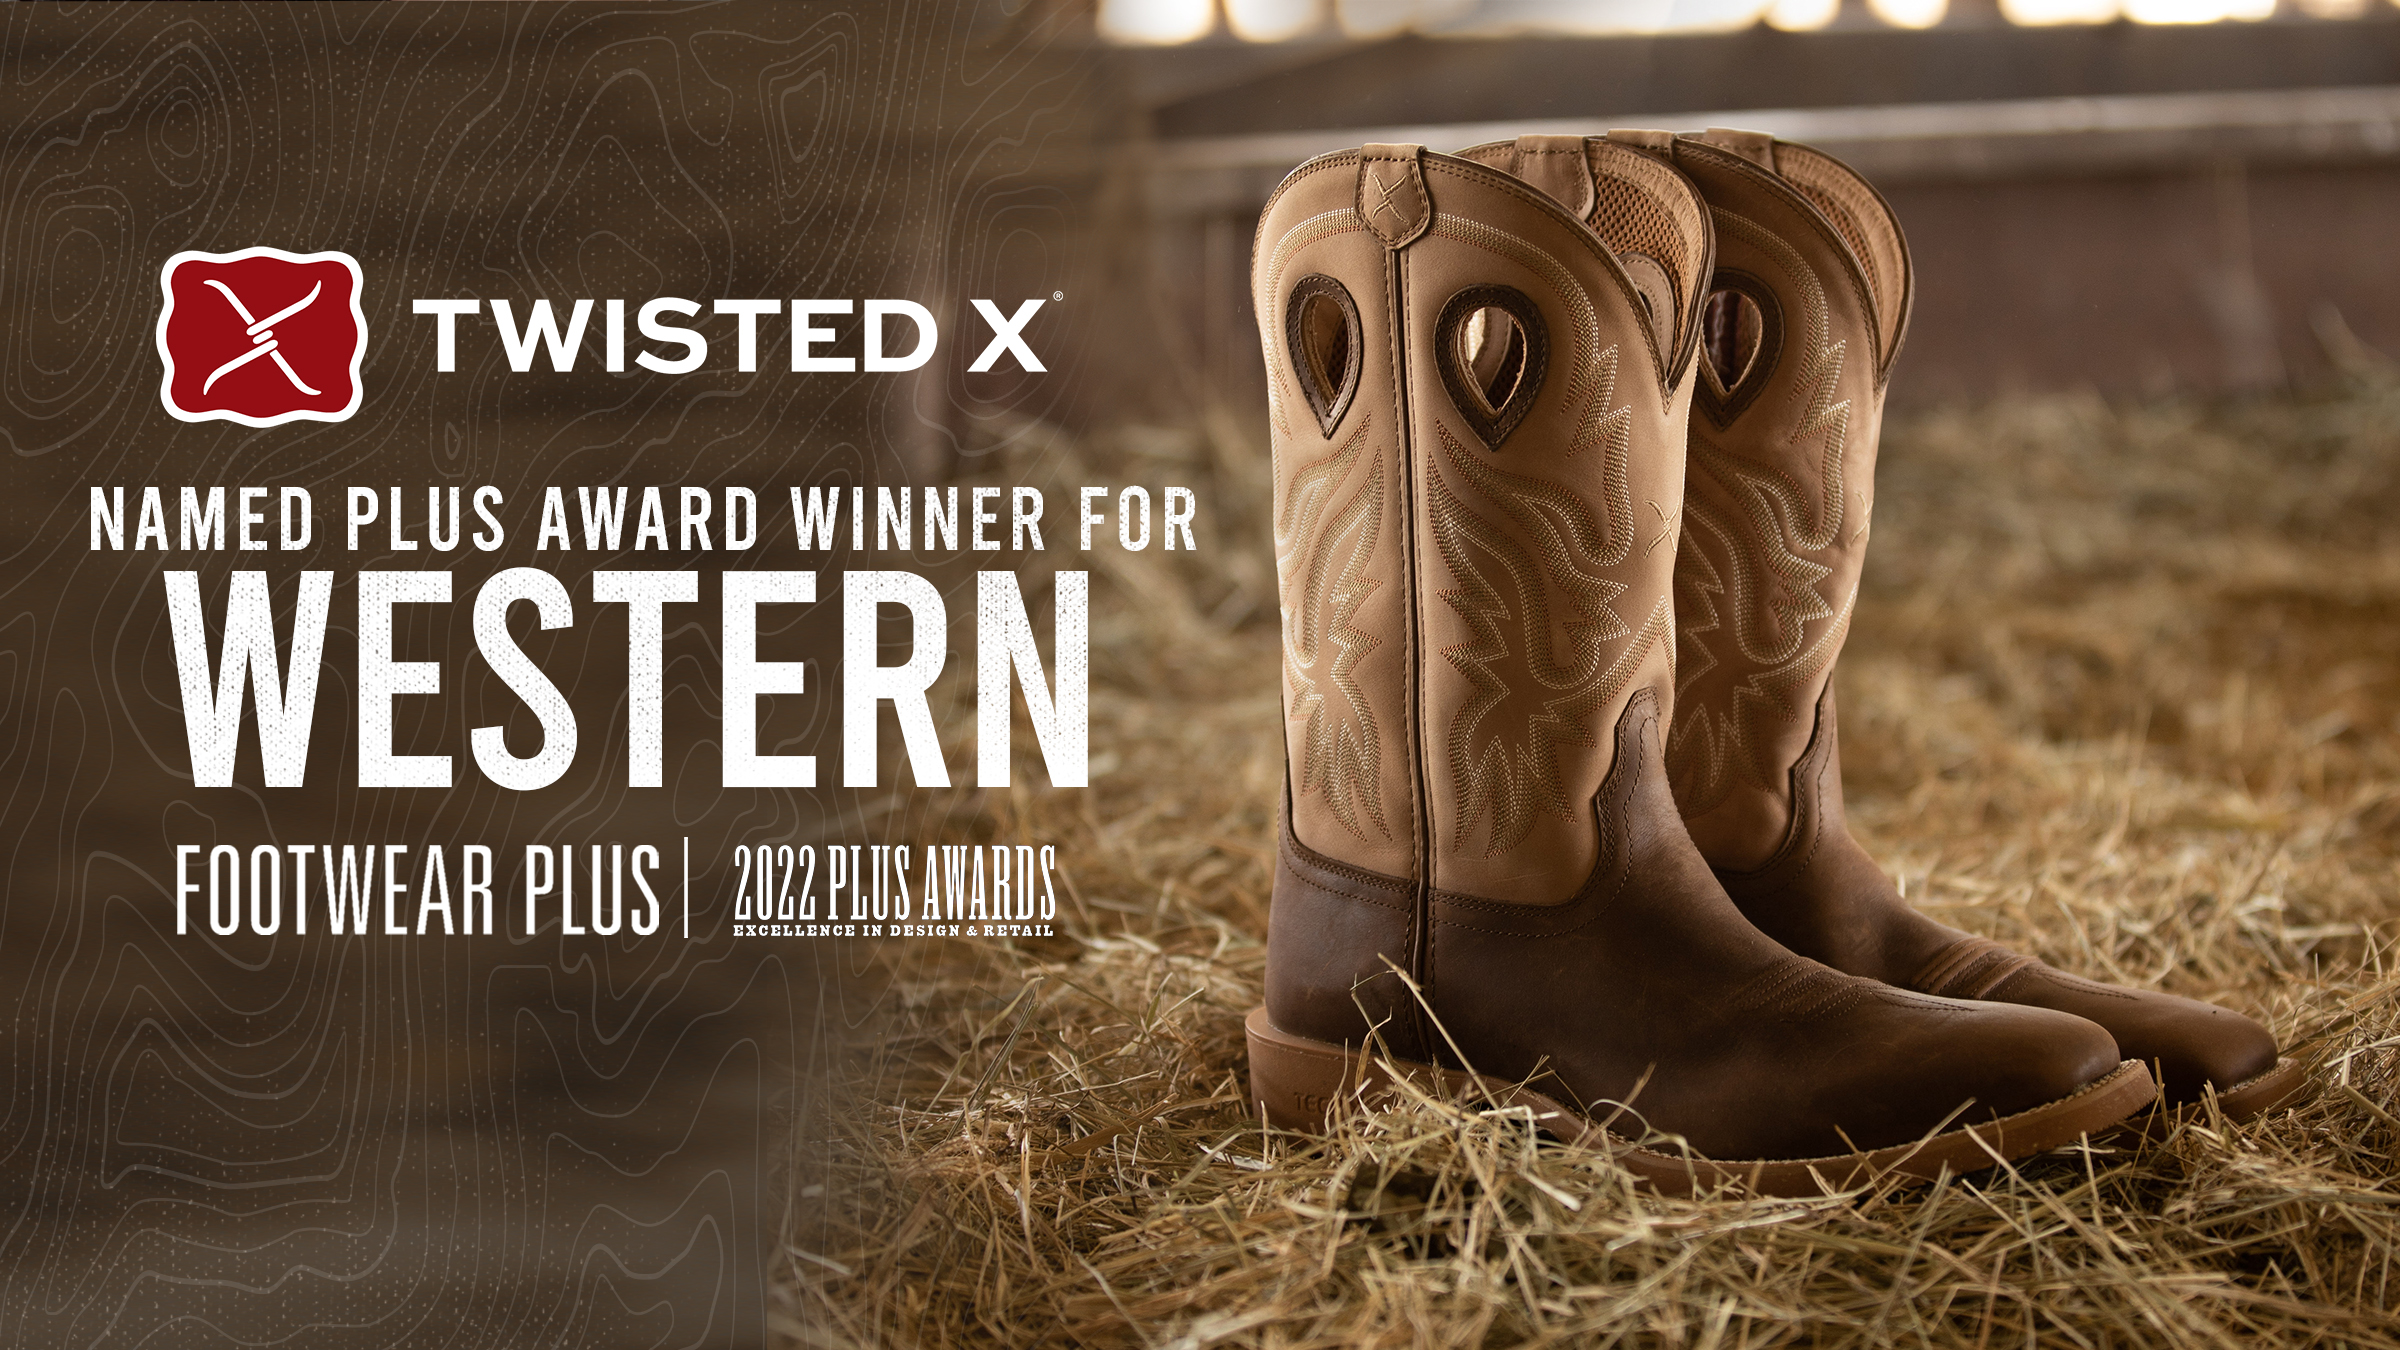 TWISTED X® WINS FOOTWEAR PLUS AWARD FOR EXCELLENCE IN WESTERN CATEGORY